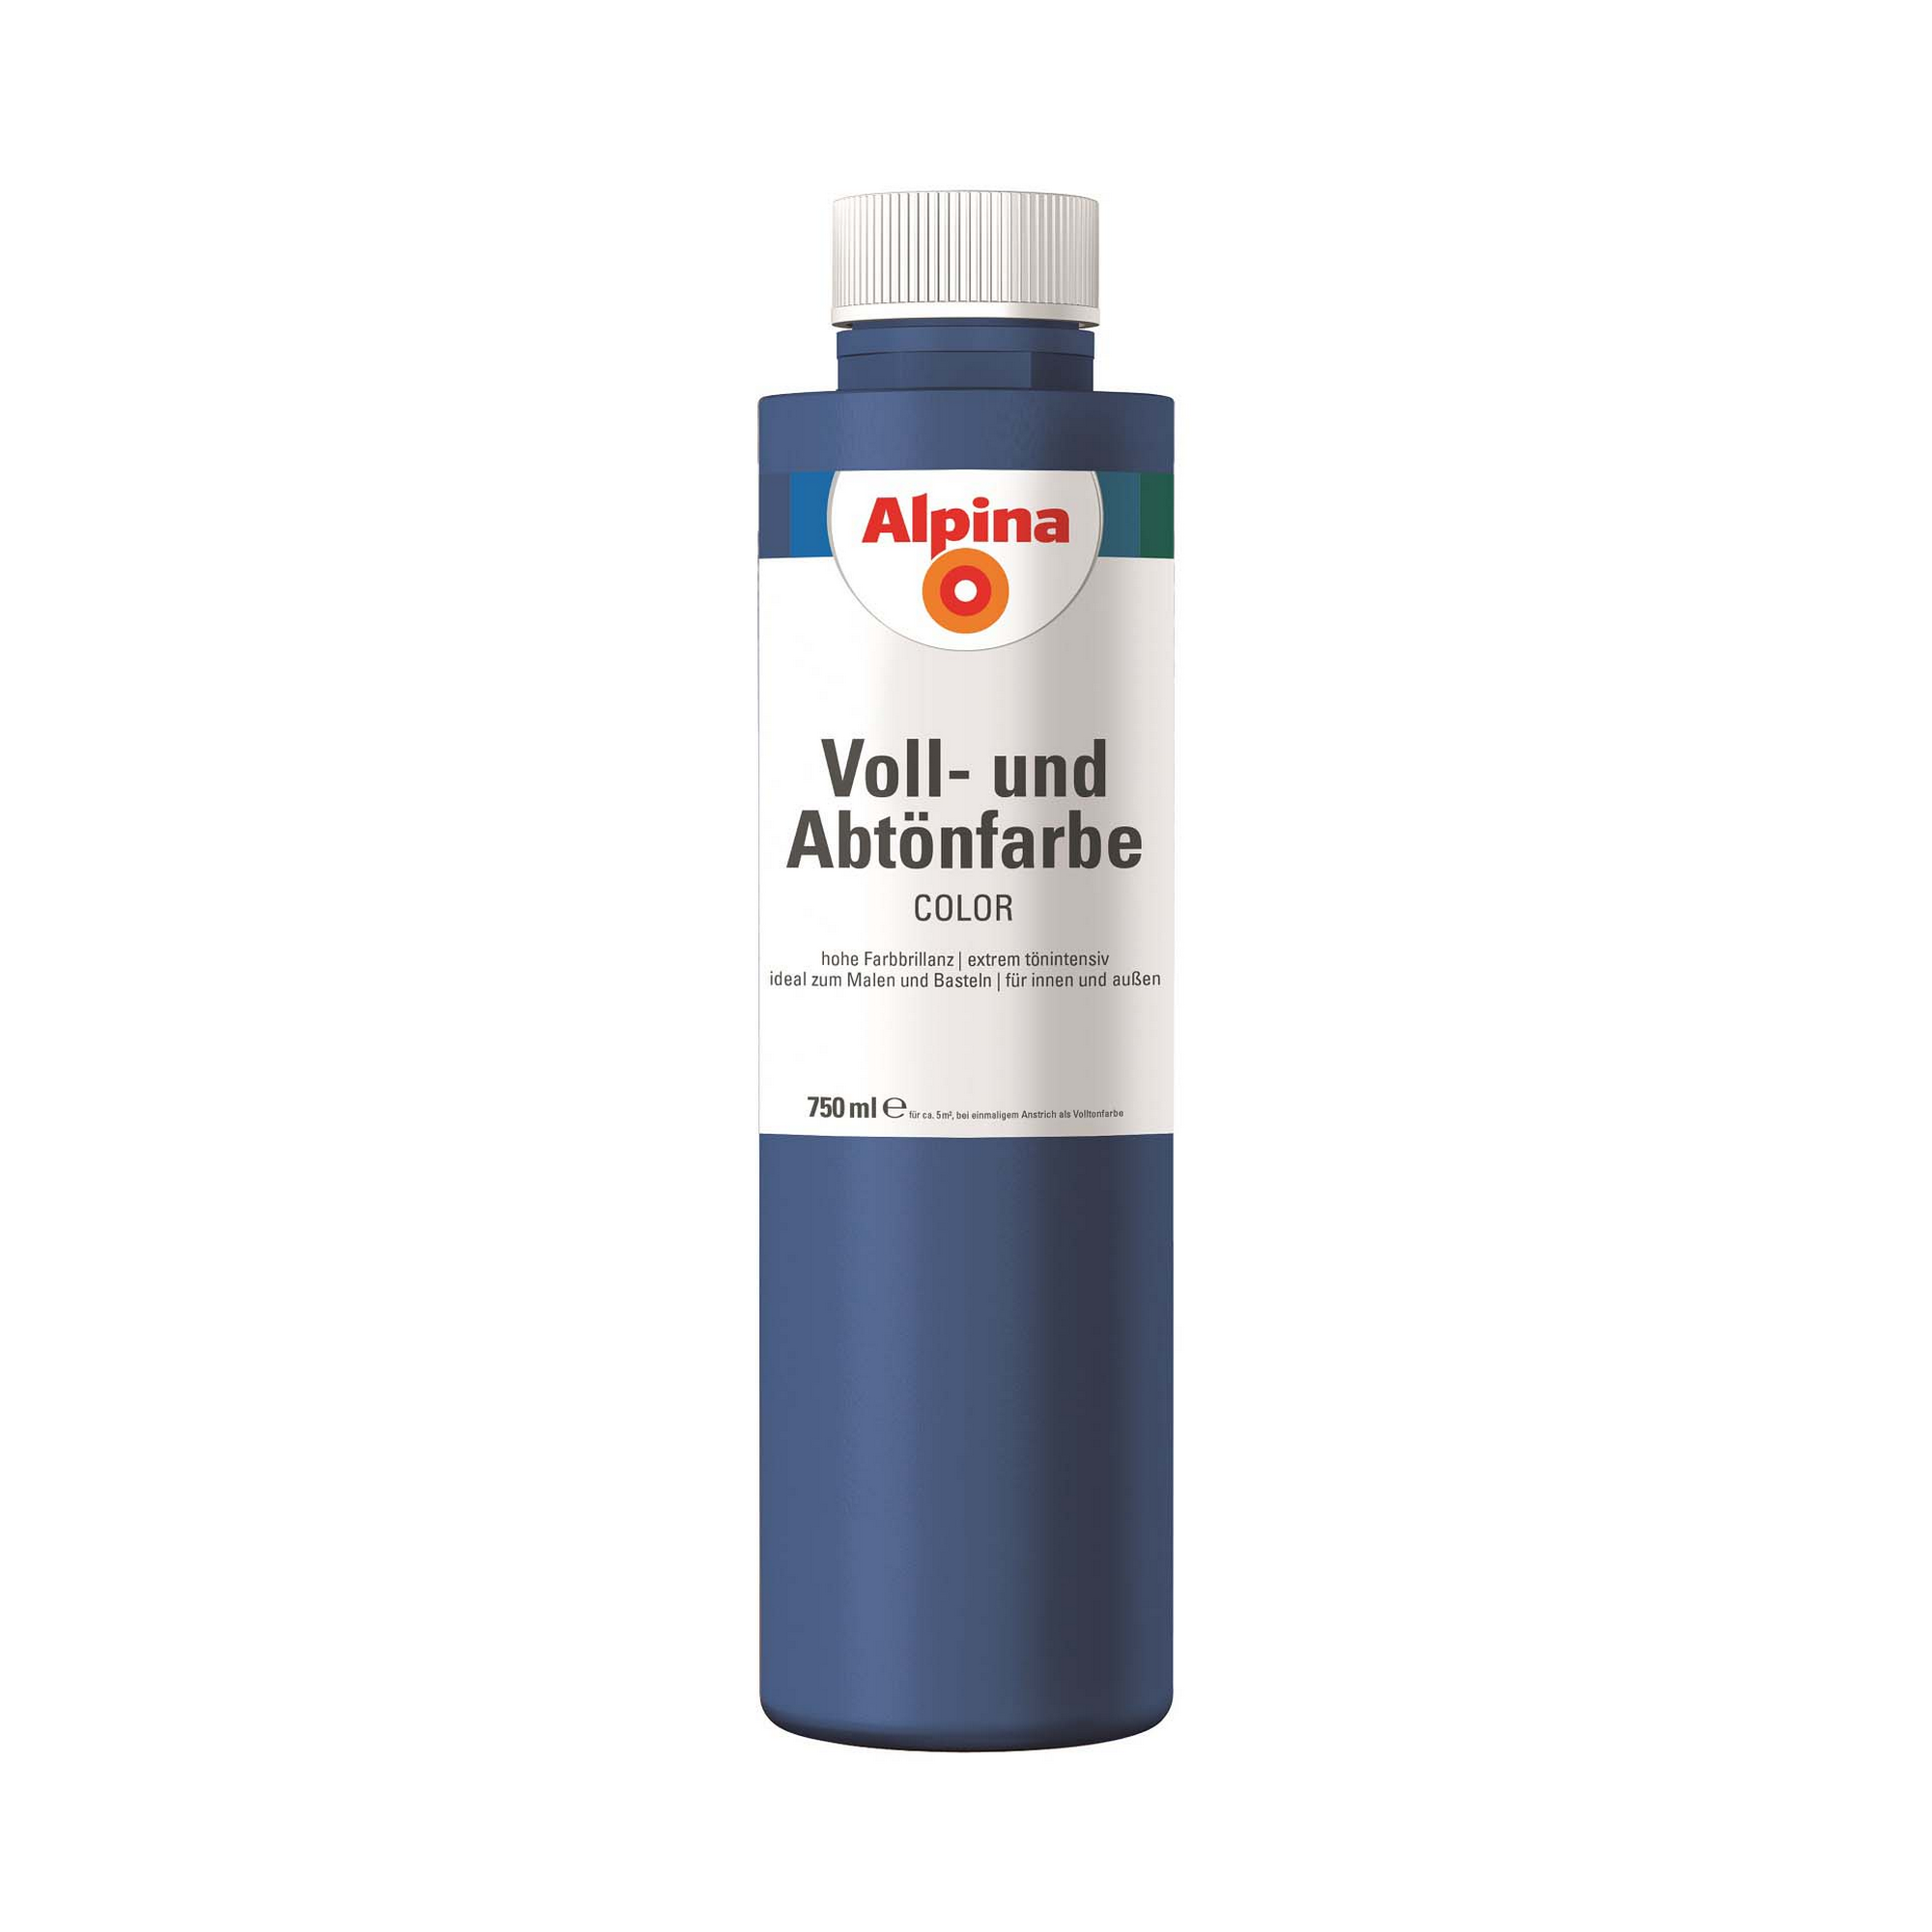 Voll- und Abtönfarbe 'Mystery Blue' dunkelblau 750 ml + product picture